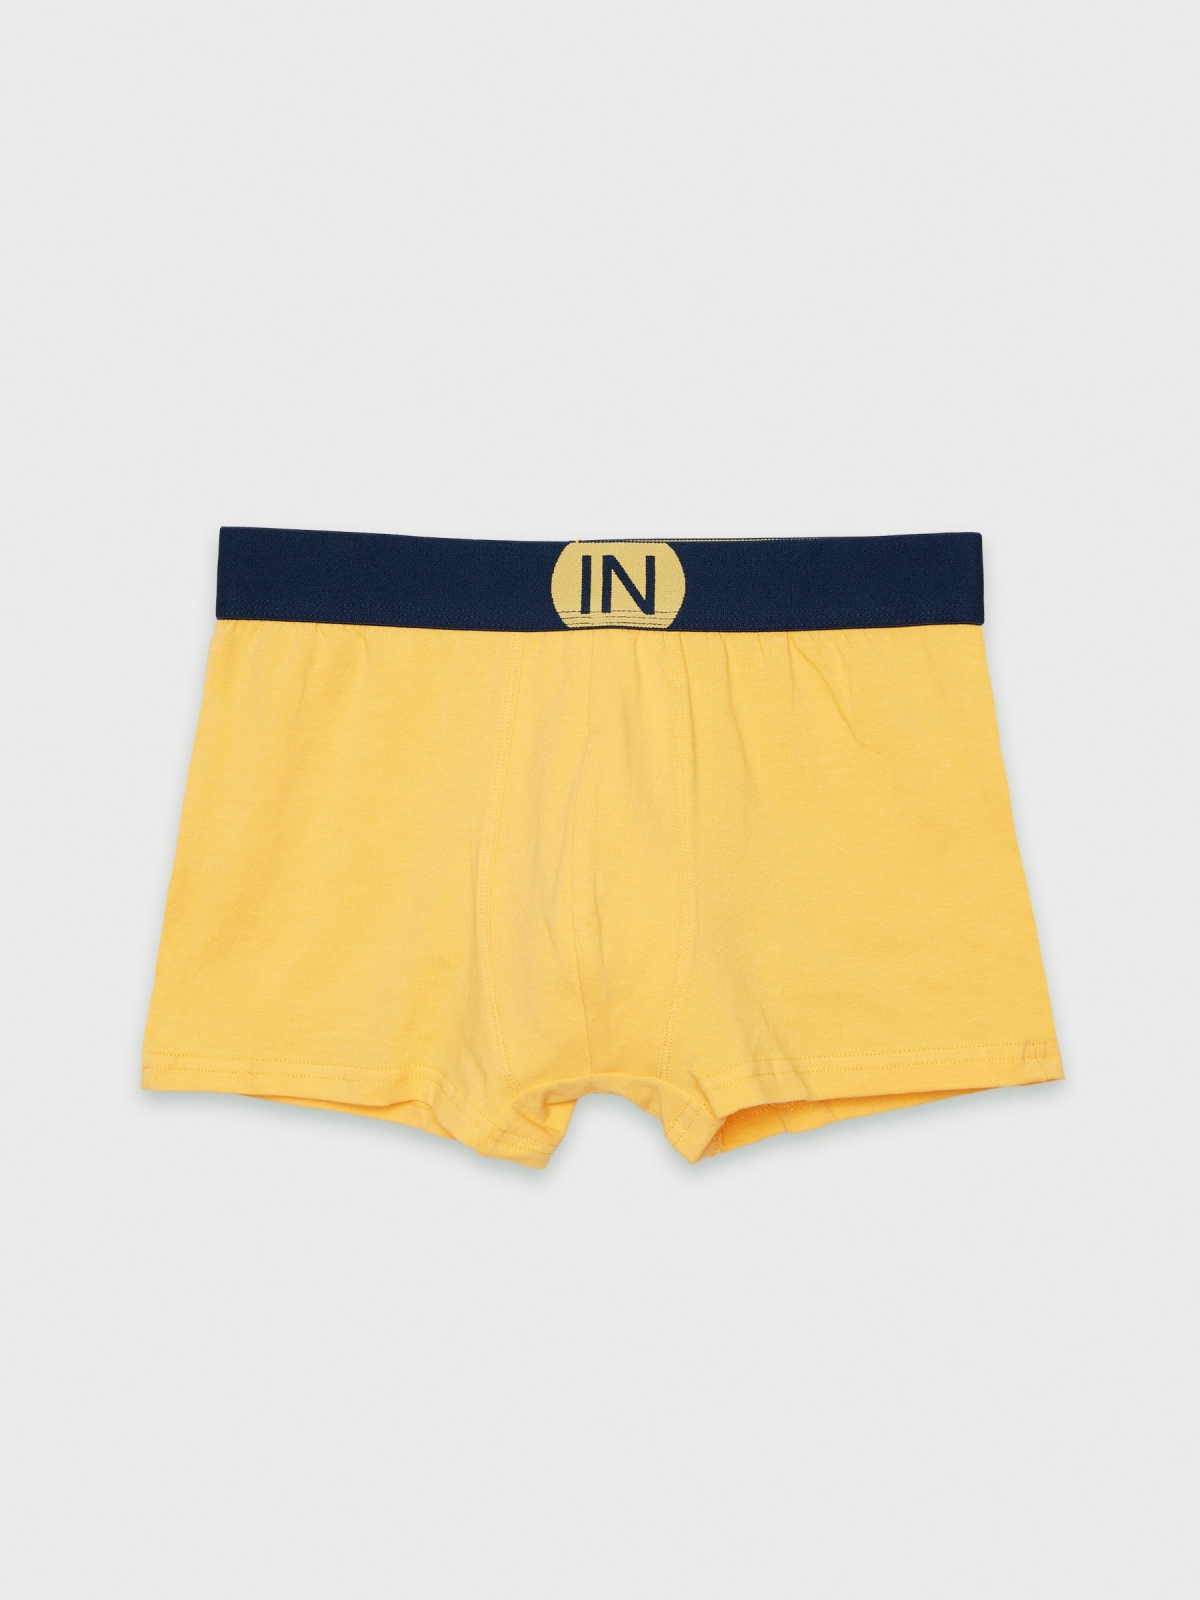 Pack of 7 colored boxers multicolor detail view